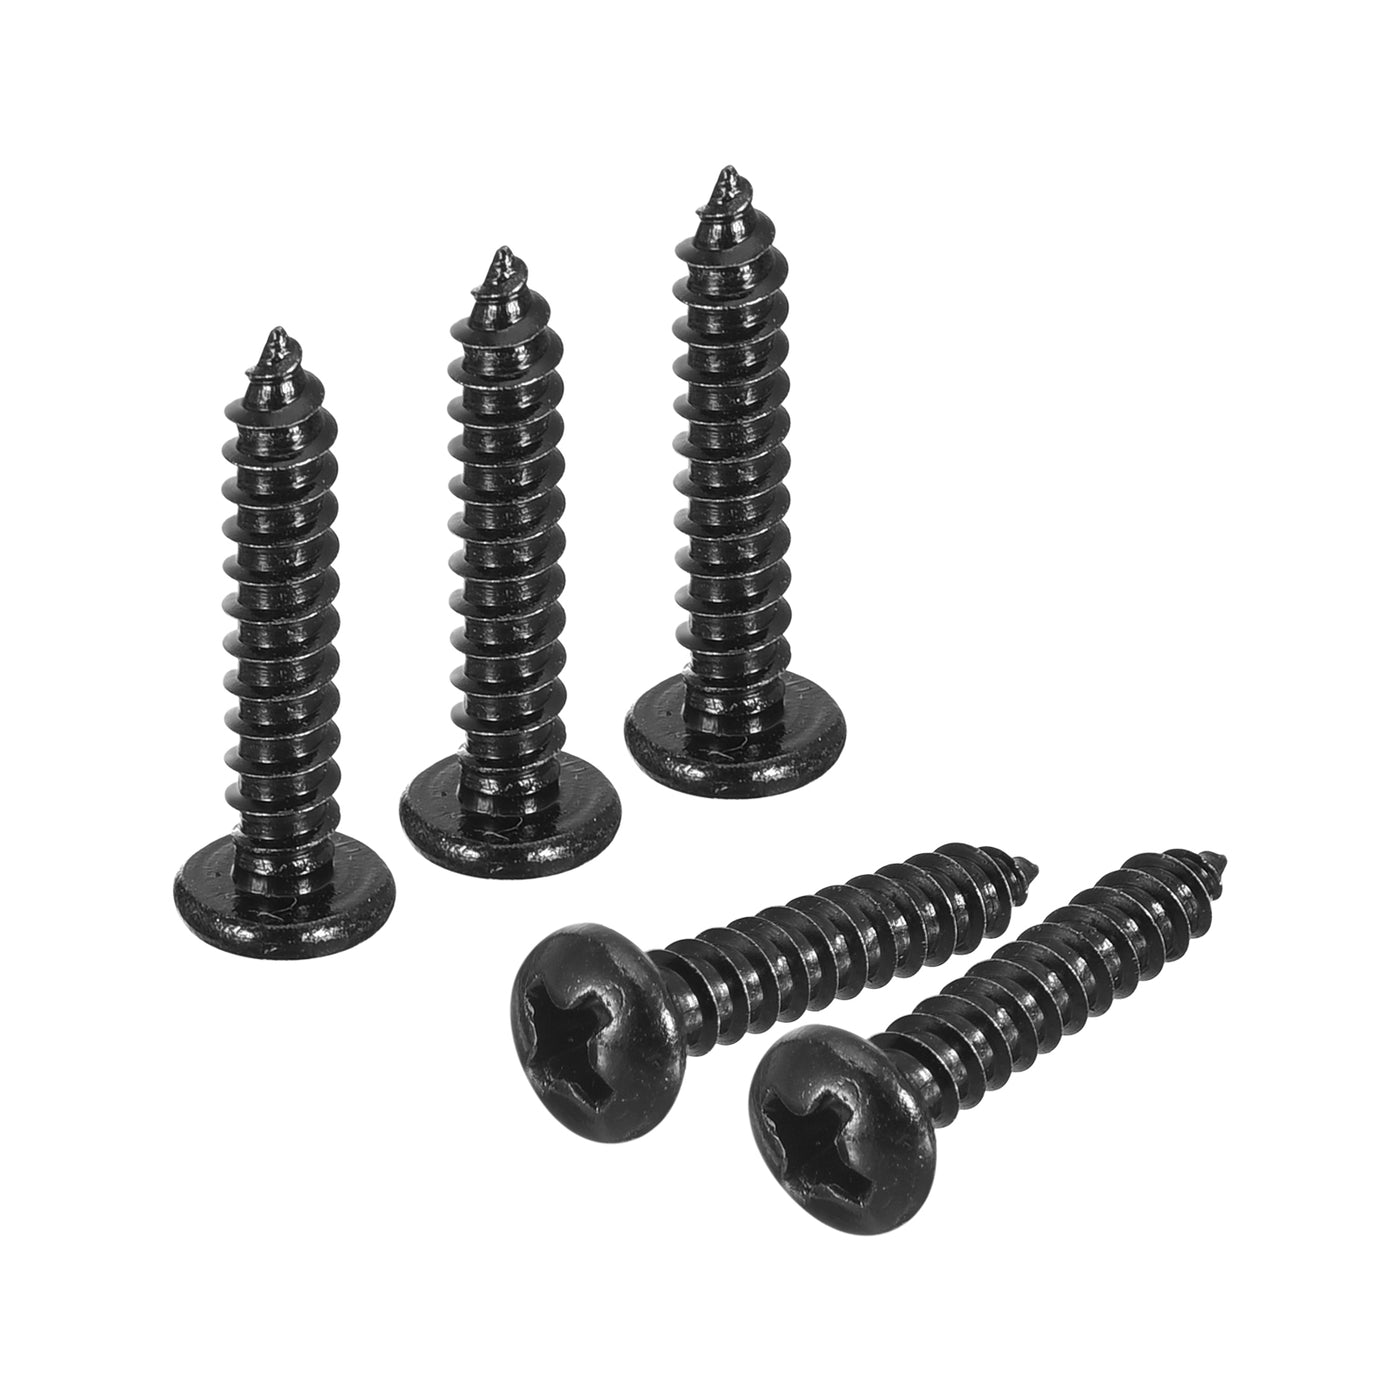 uxcell Uxcell #6 x 11/16" Phillips Pan Head Self-tapping Screw, 100pcs - 304 Stainless Steel Round Head Wood Screw Full Thread (Black)